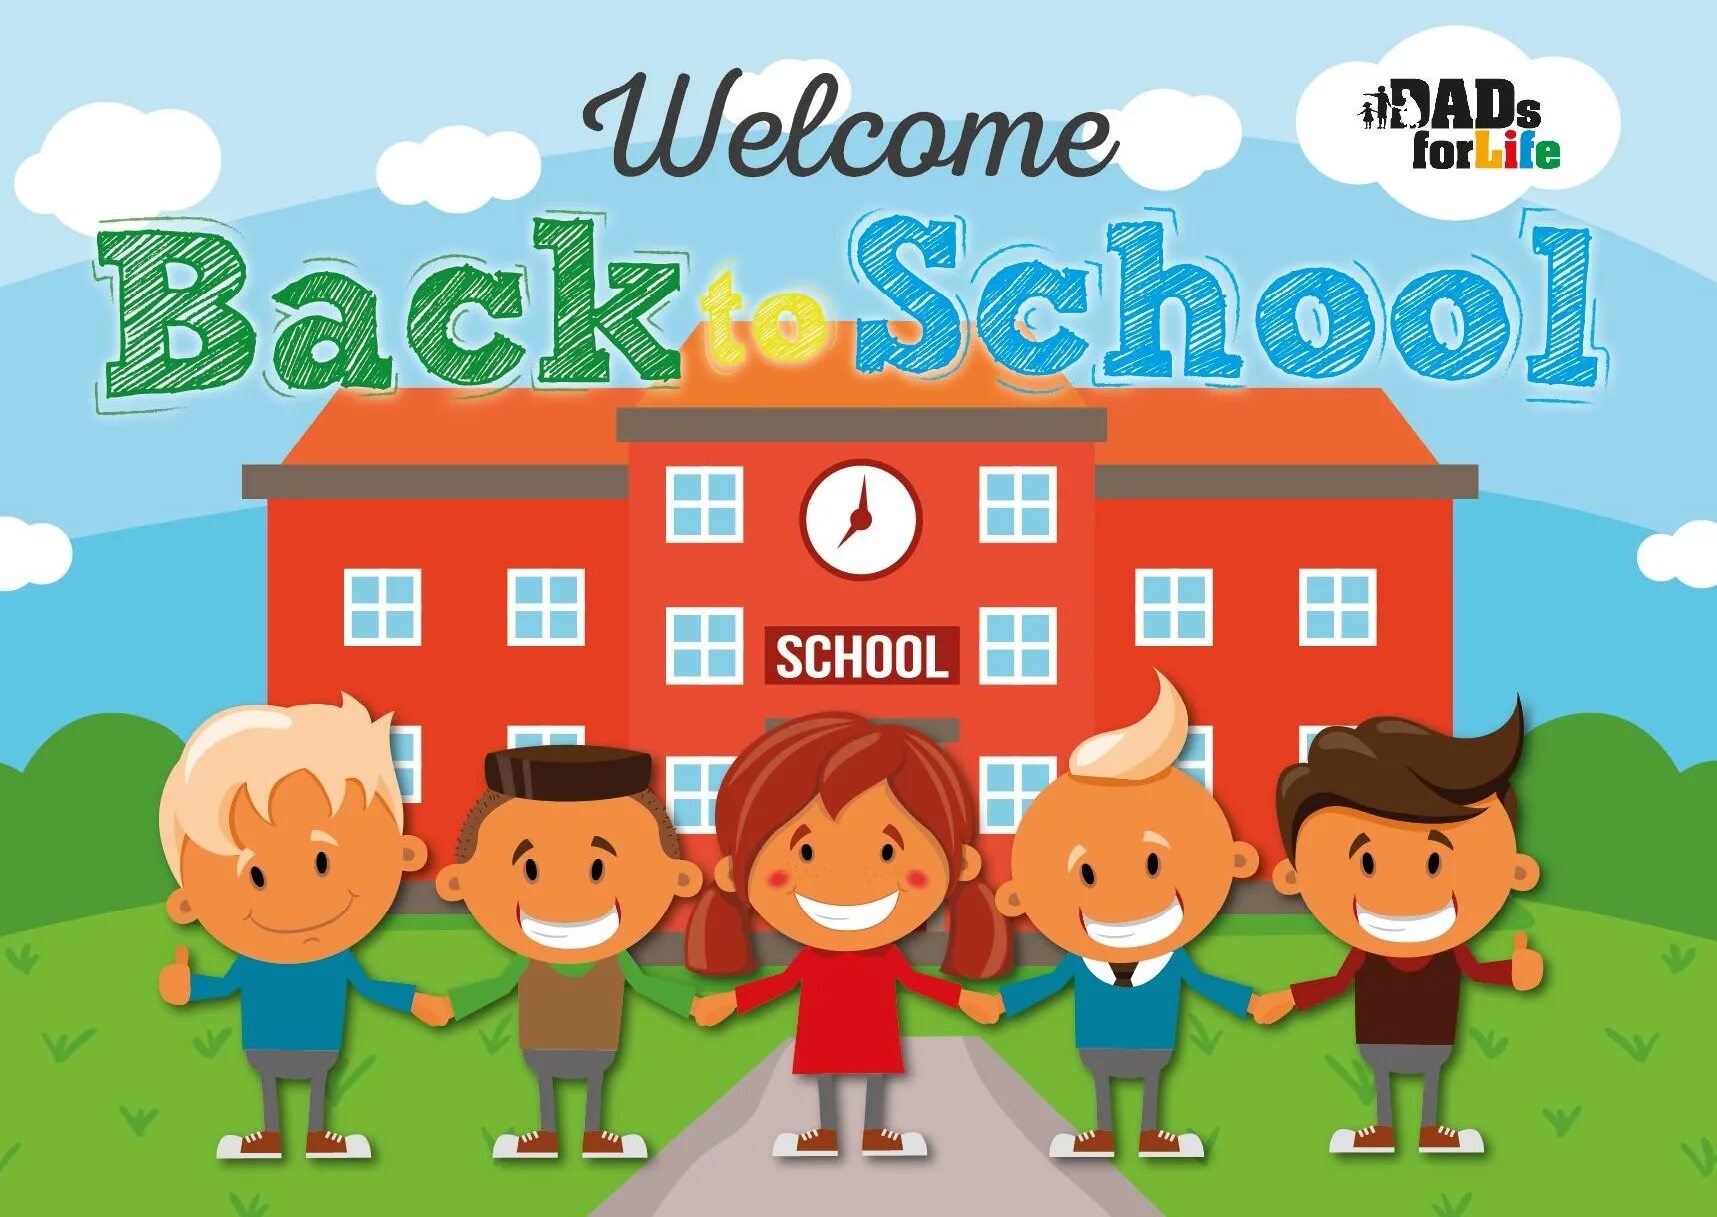 Am new to the school. Welcome back to School. Go back to School. Рисунок our School. Welcome back to School Kids.